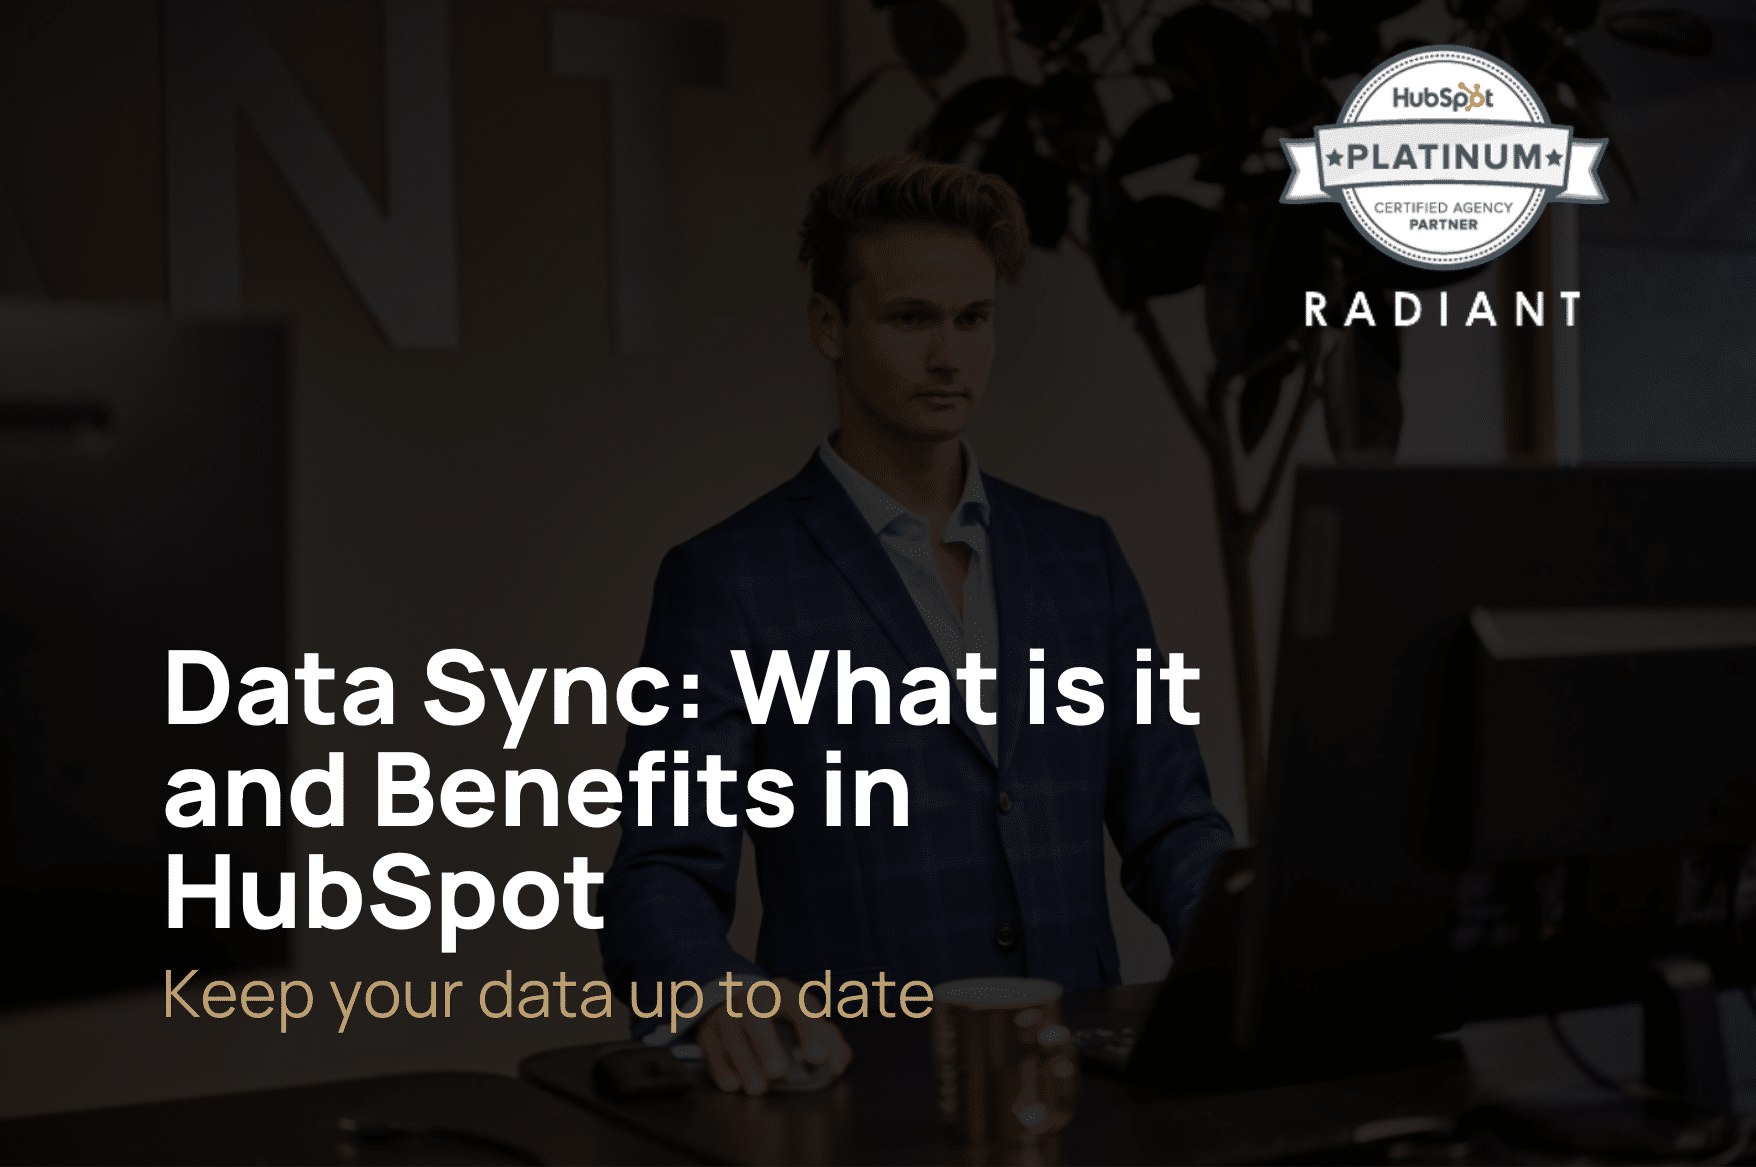 Data Sync: What is it and Benefits in HubSpot